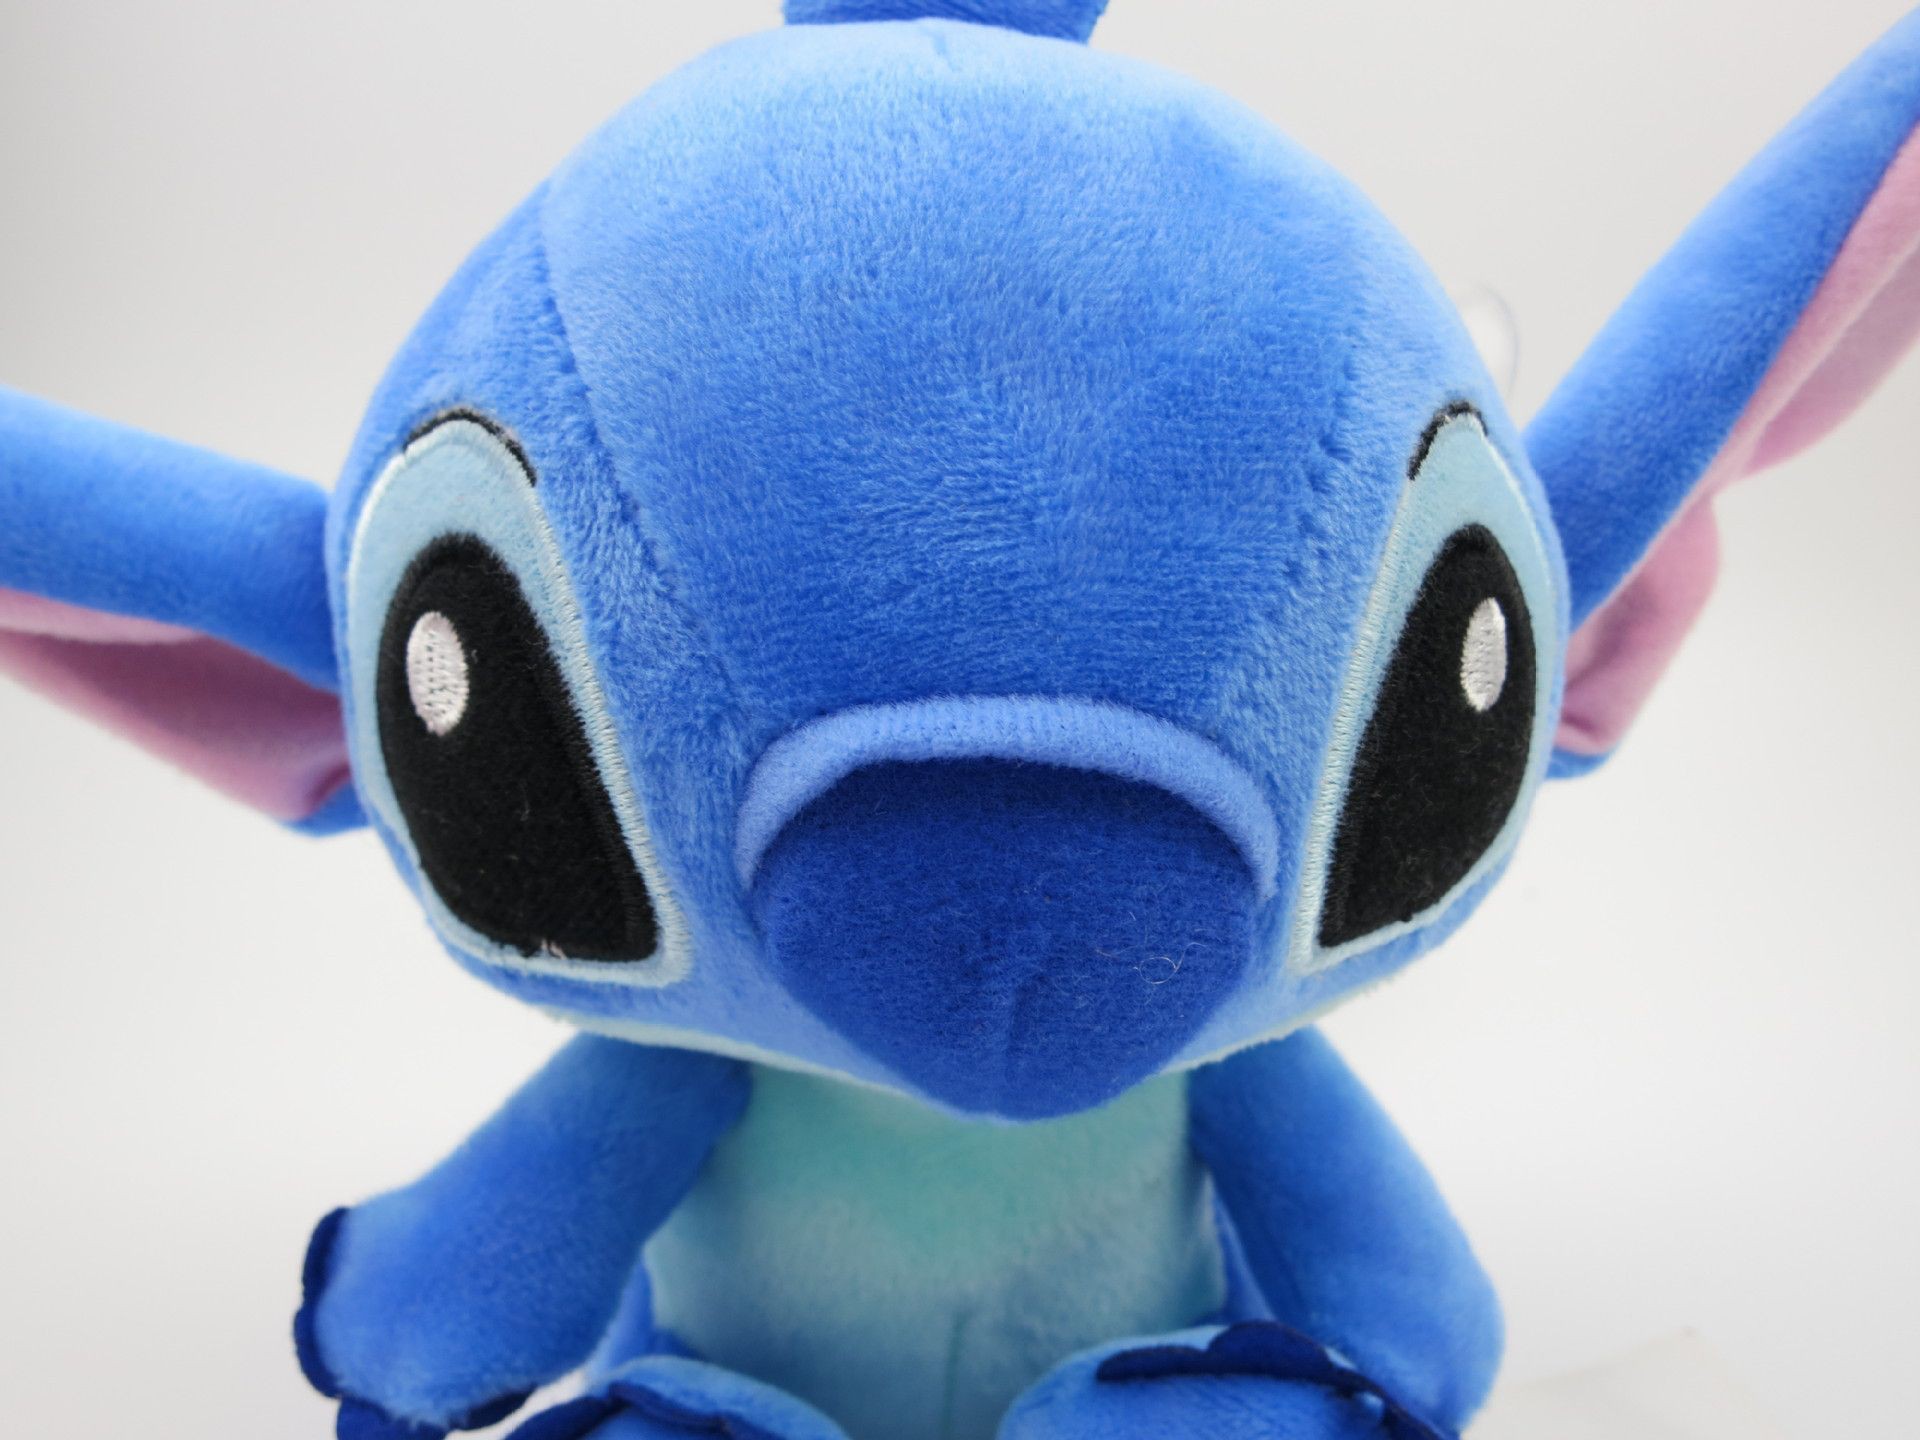 20cm/7.8in Lilo and Stitch Plush Toy Soft Cute Touch Kids Stuffed Gift Toy Doll